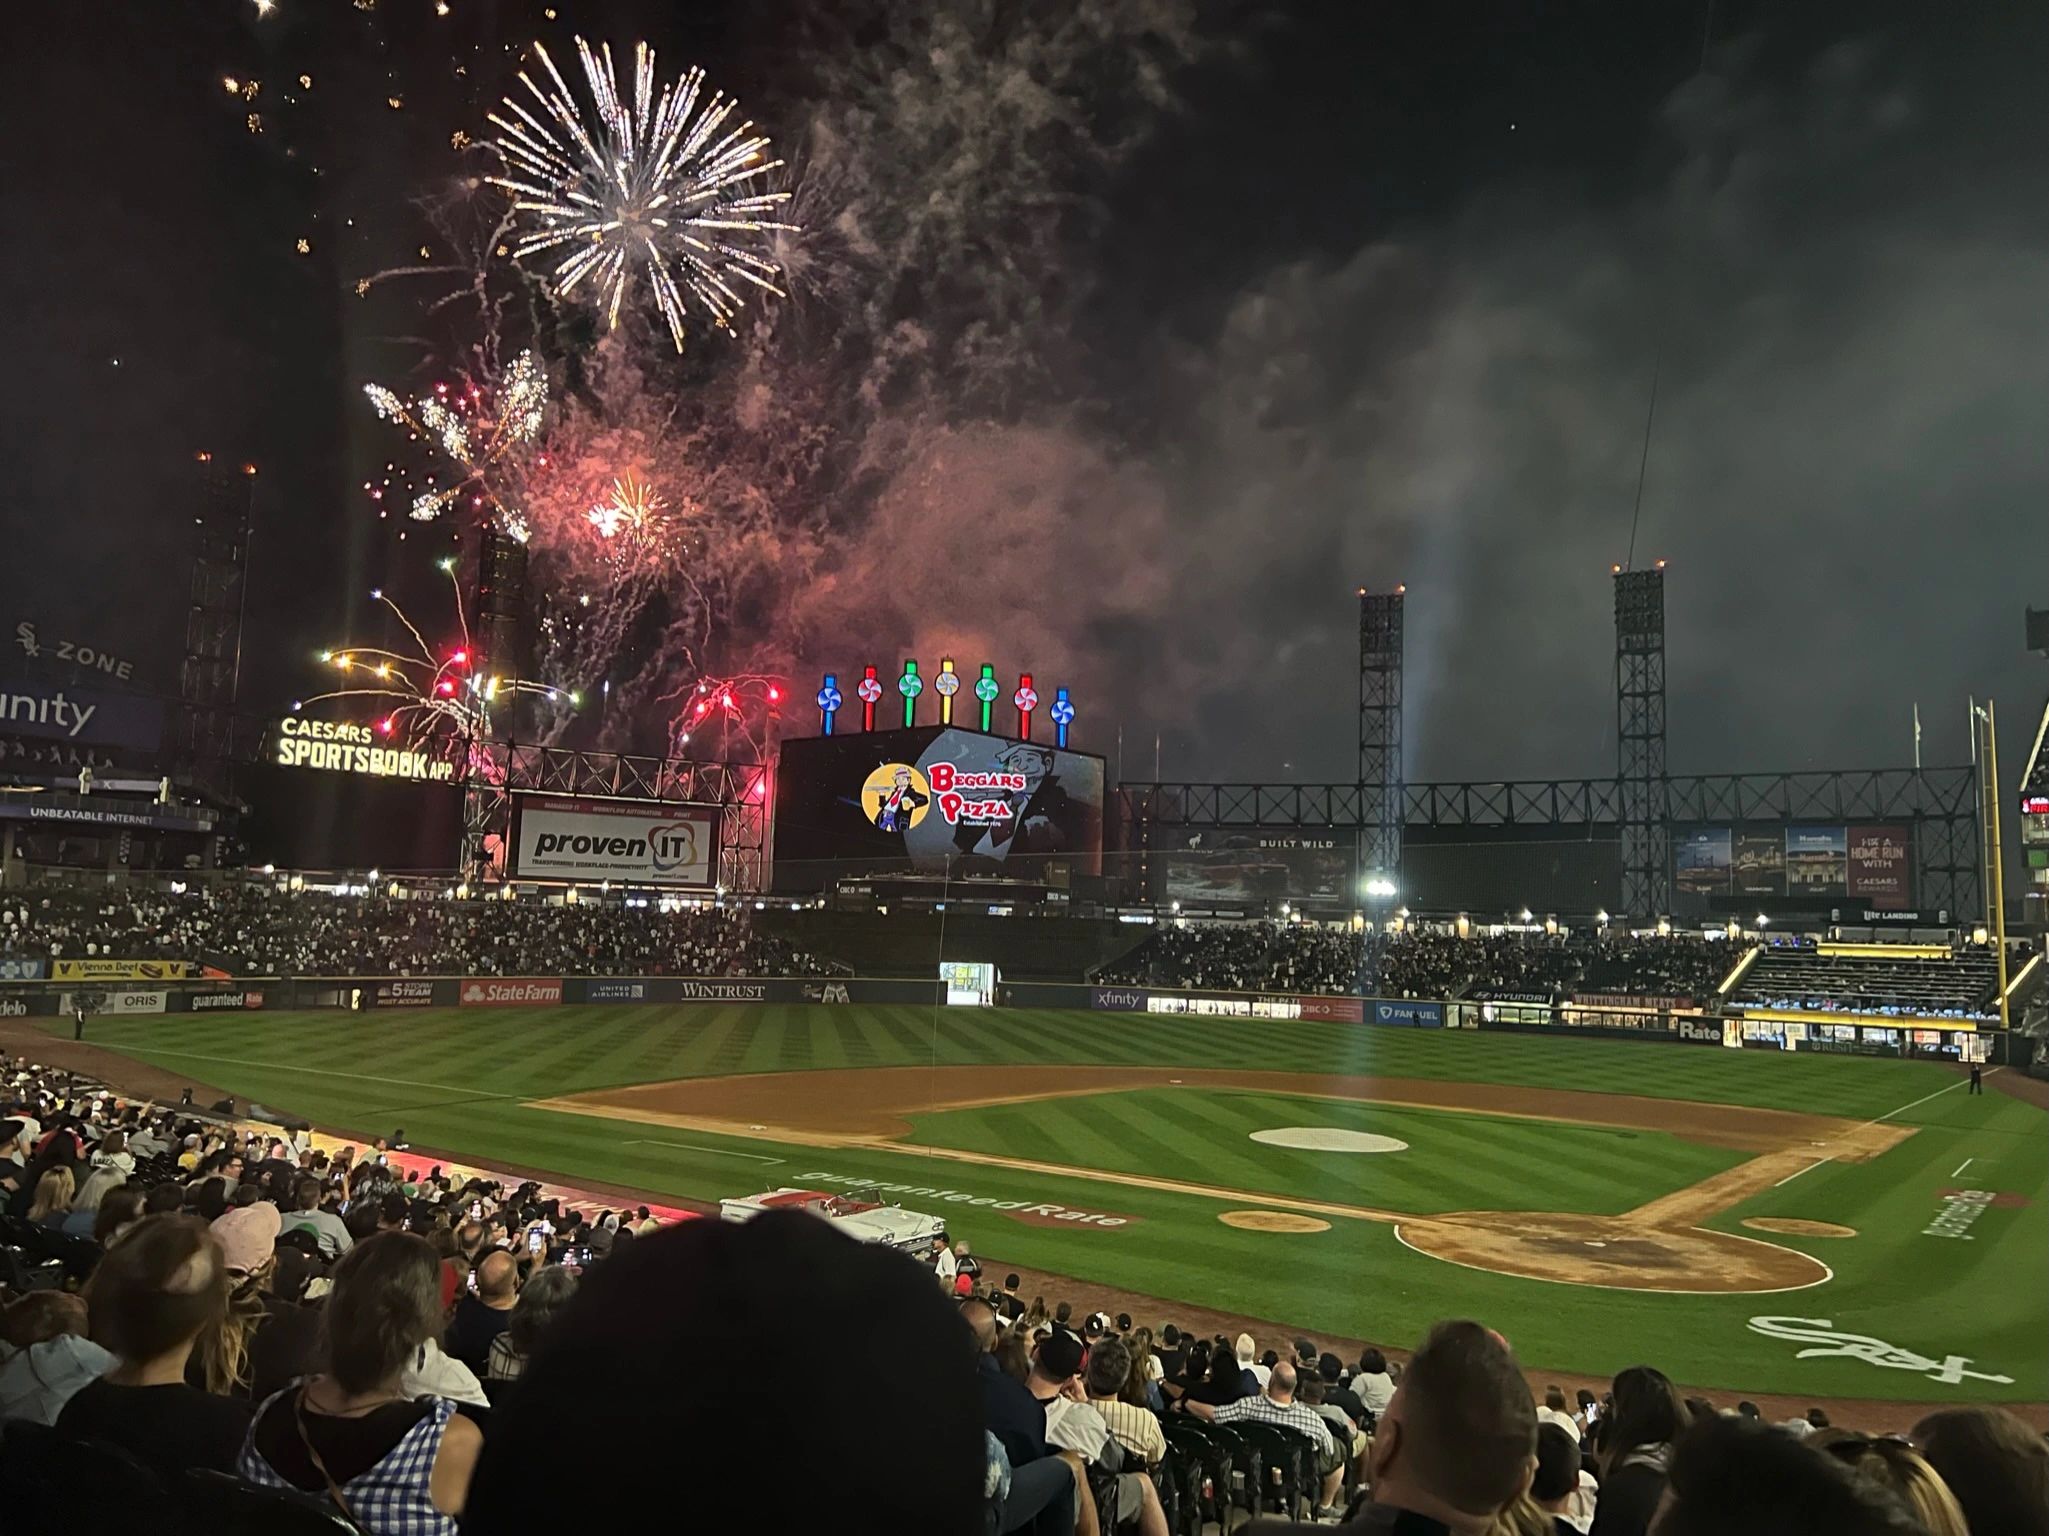 Scenics at Guaranteed Rate Field - Inside the White Sox